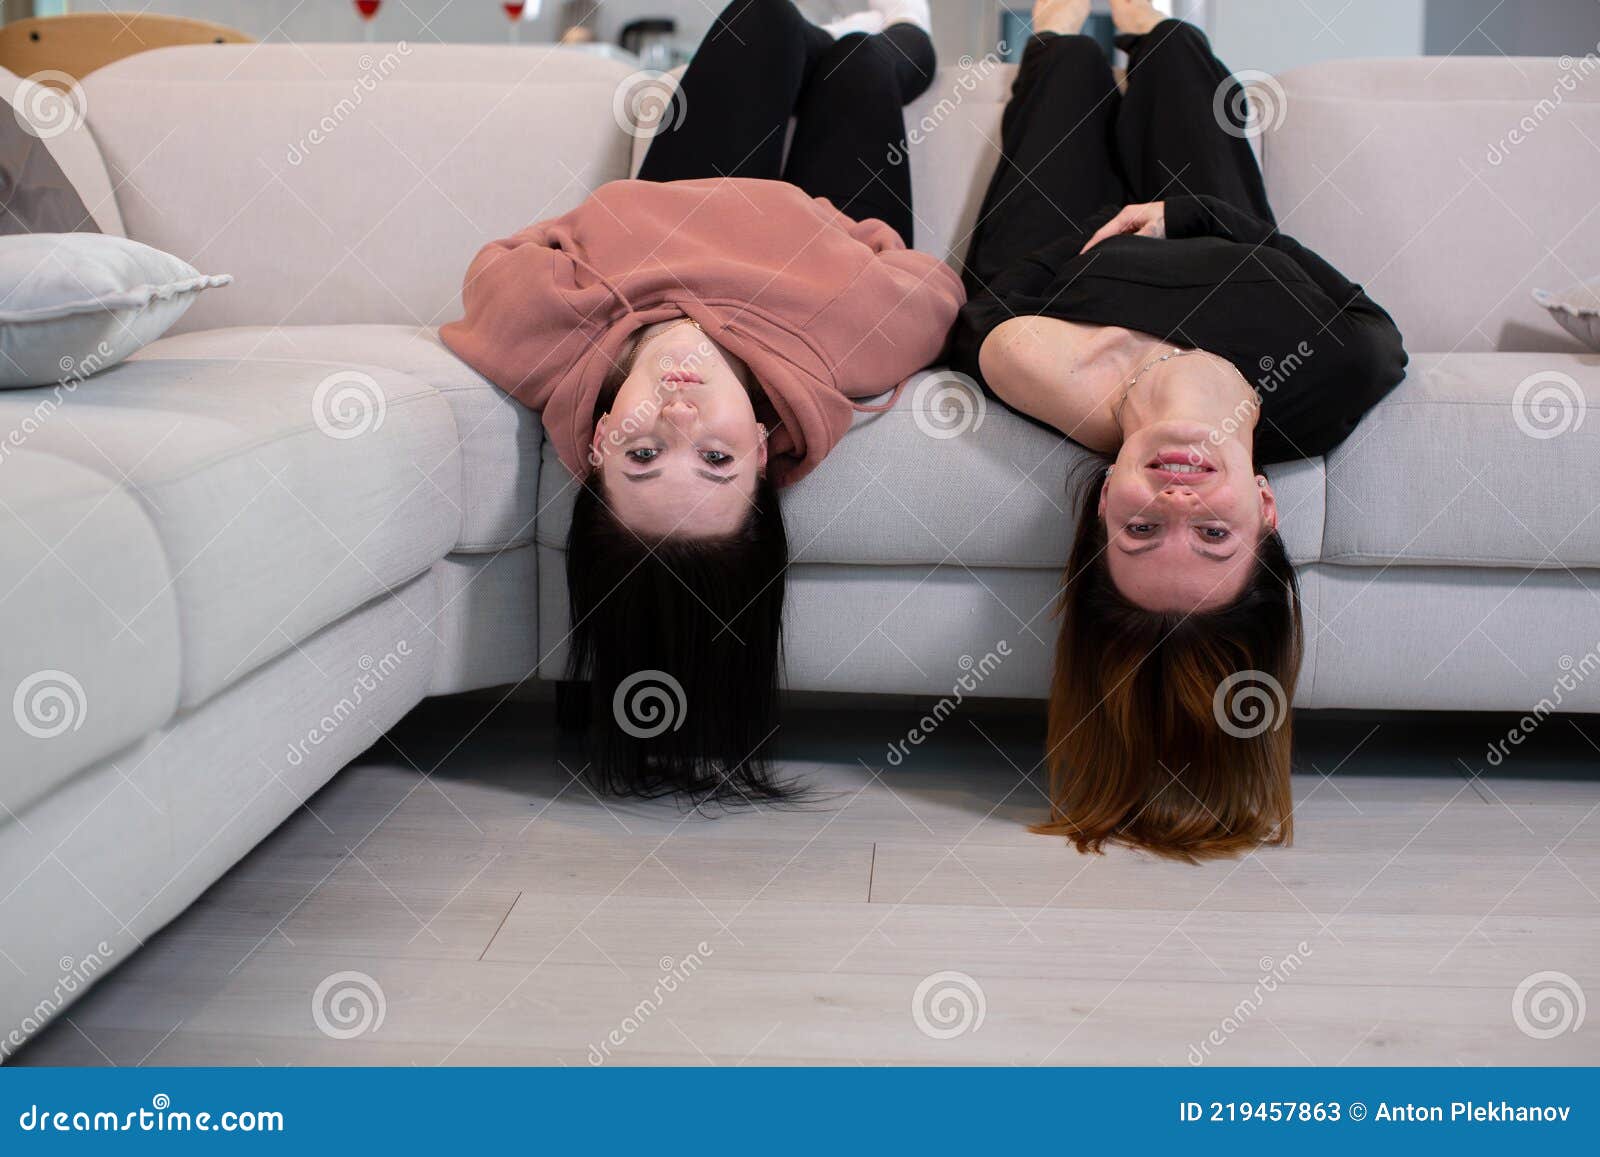 Two Young Girls Lie On The Couch With Their Legs Up Staring At The Camera Stock Image Image